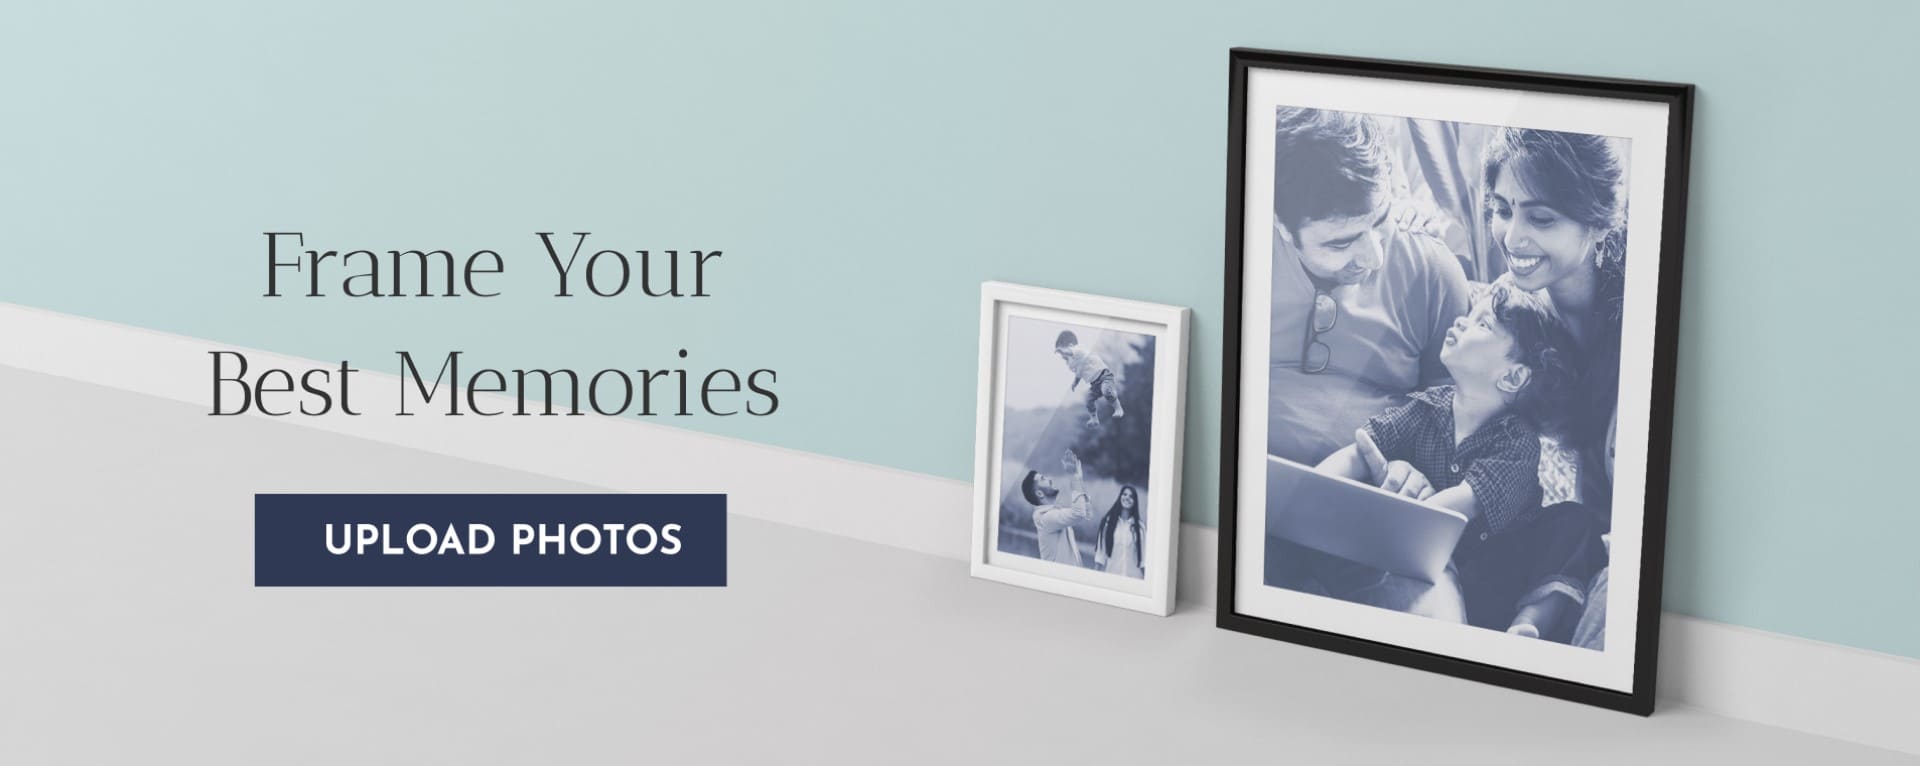 Frame Your Best Moments